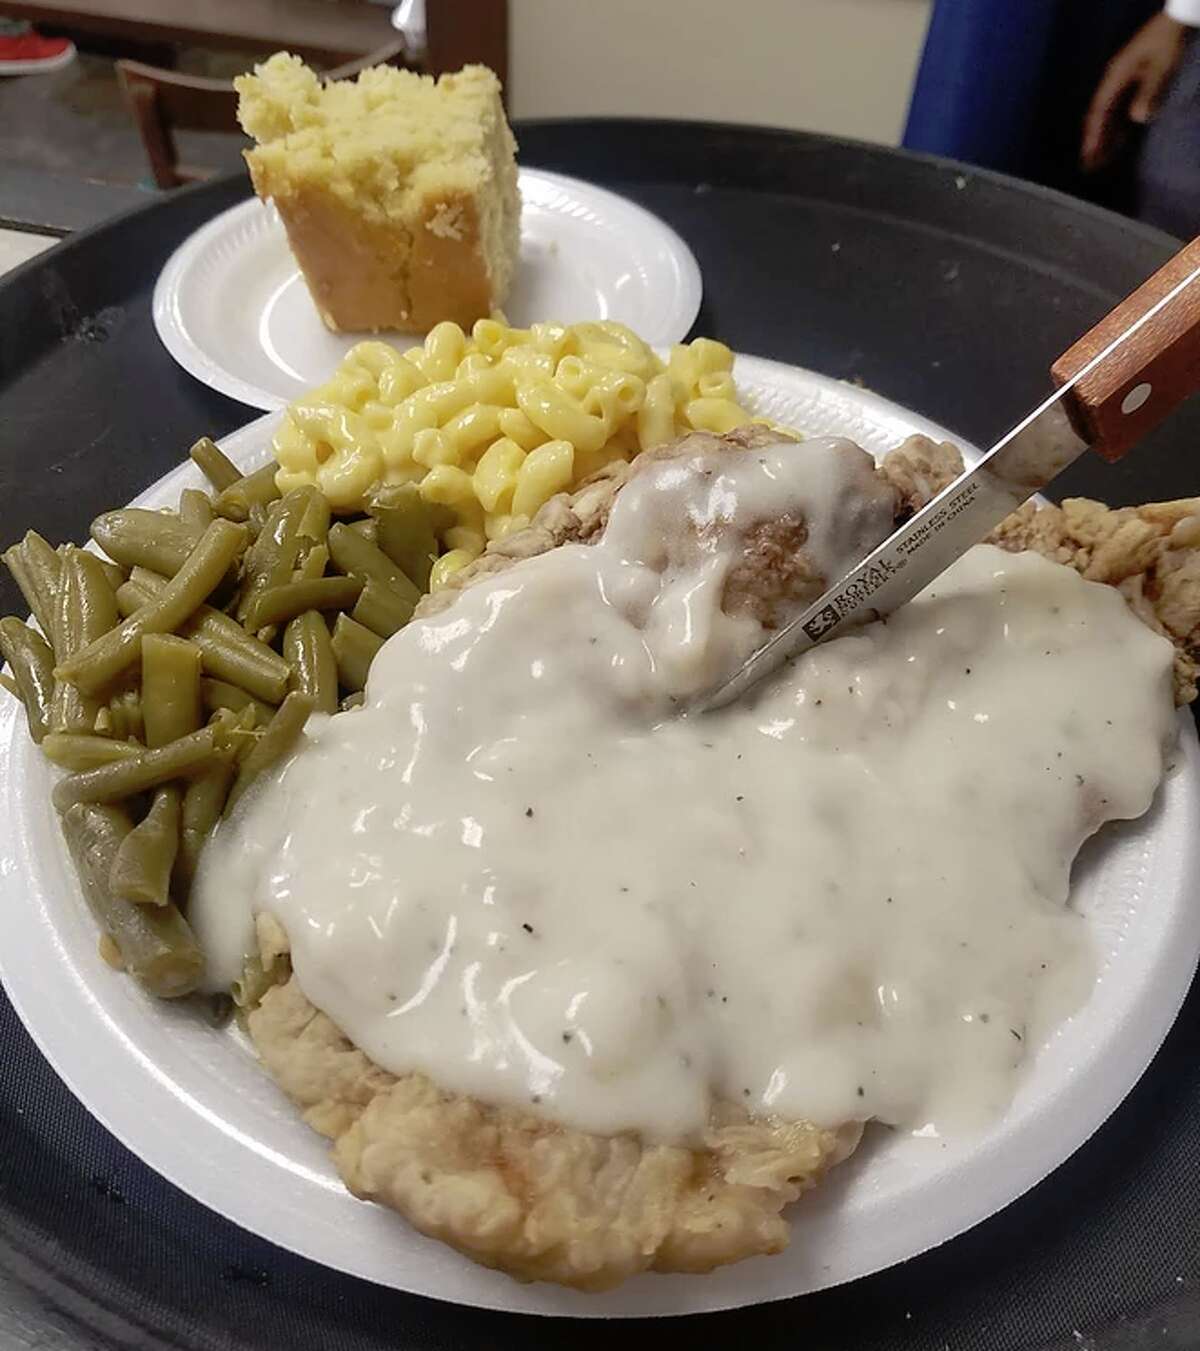 2. Mr. A OK's Kitchen: 4403 Rittiman Road"This soul food spot is great! Small, unassuming location. Attentive service and really delicious food. The chicken fried chicken was a huge, moist, flavorful chicken breast with a crisp, yummy breading," Gina H.